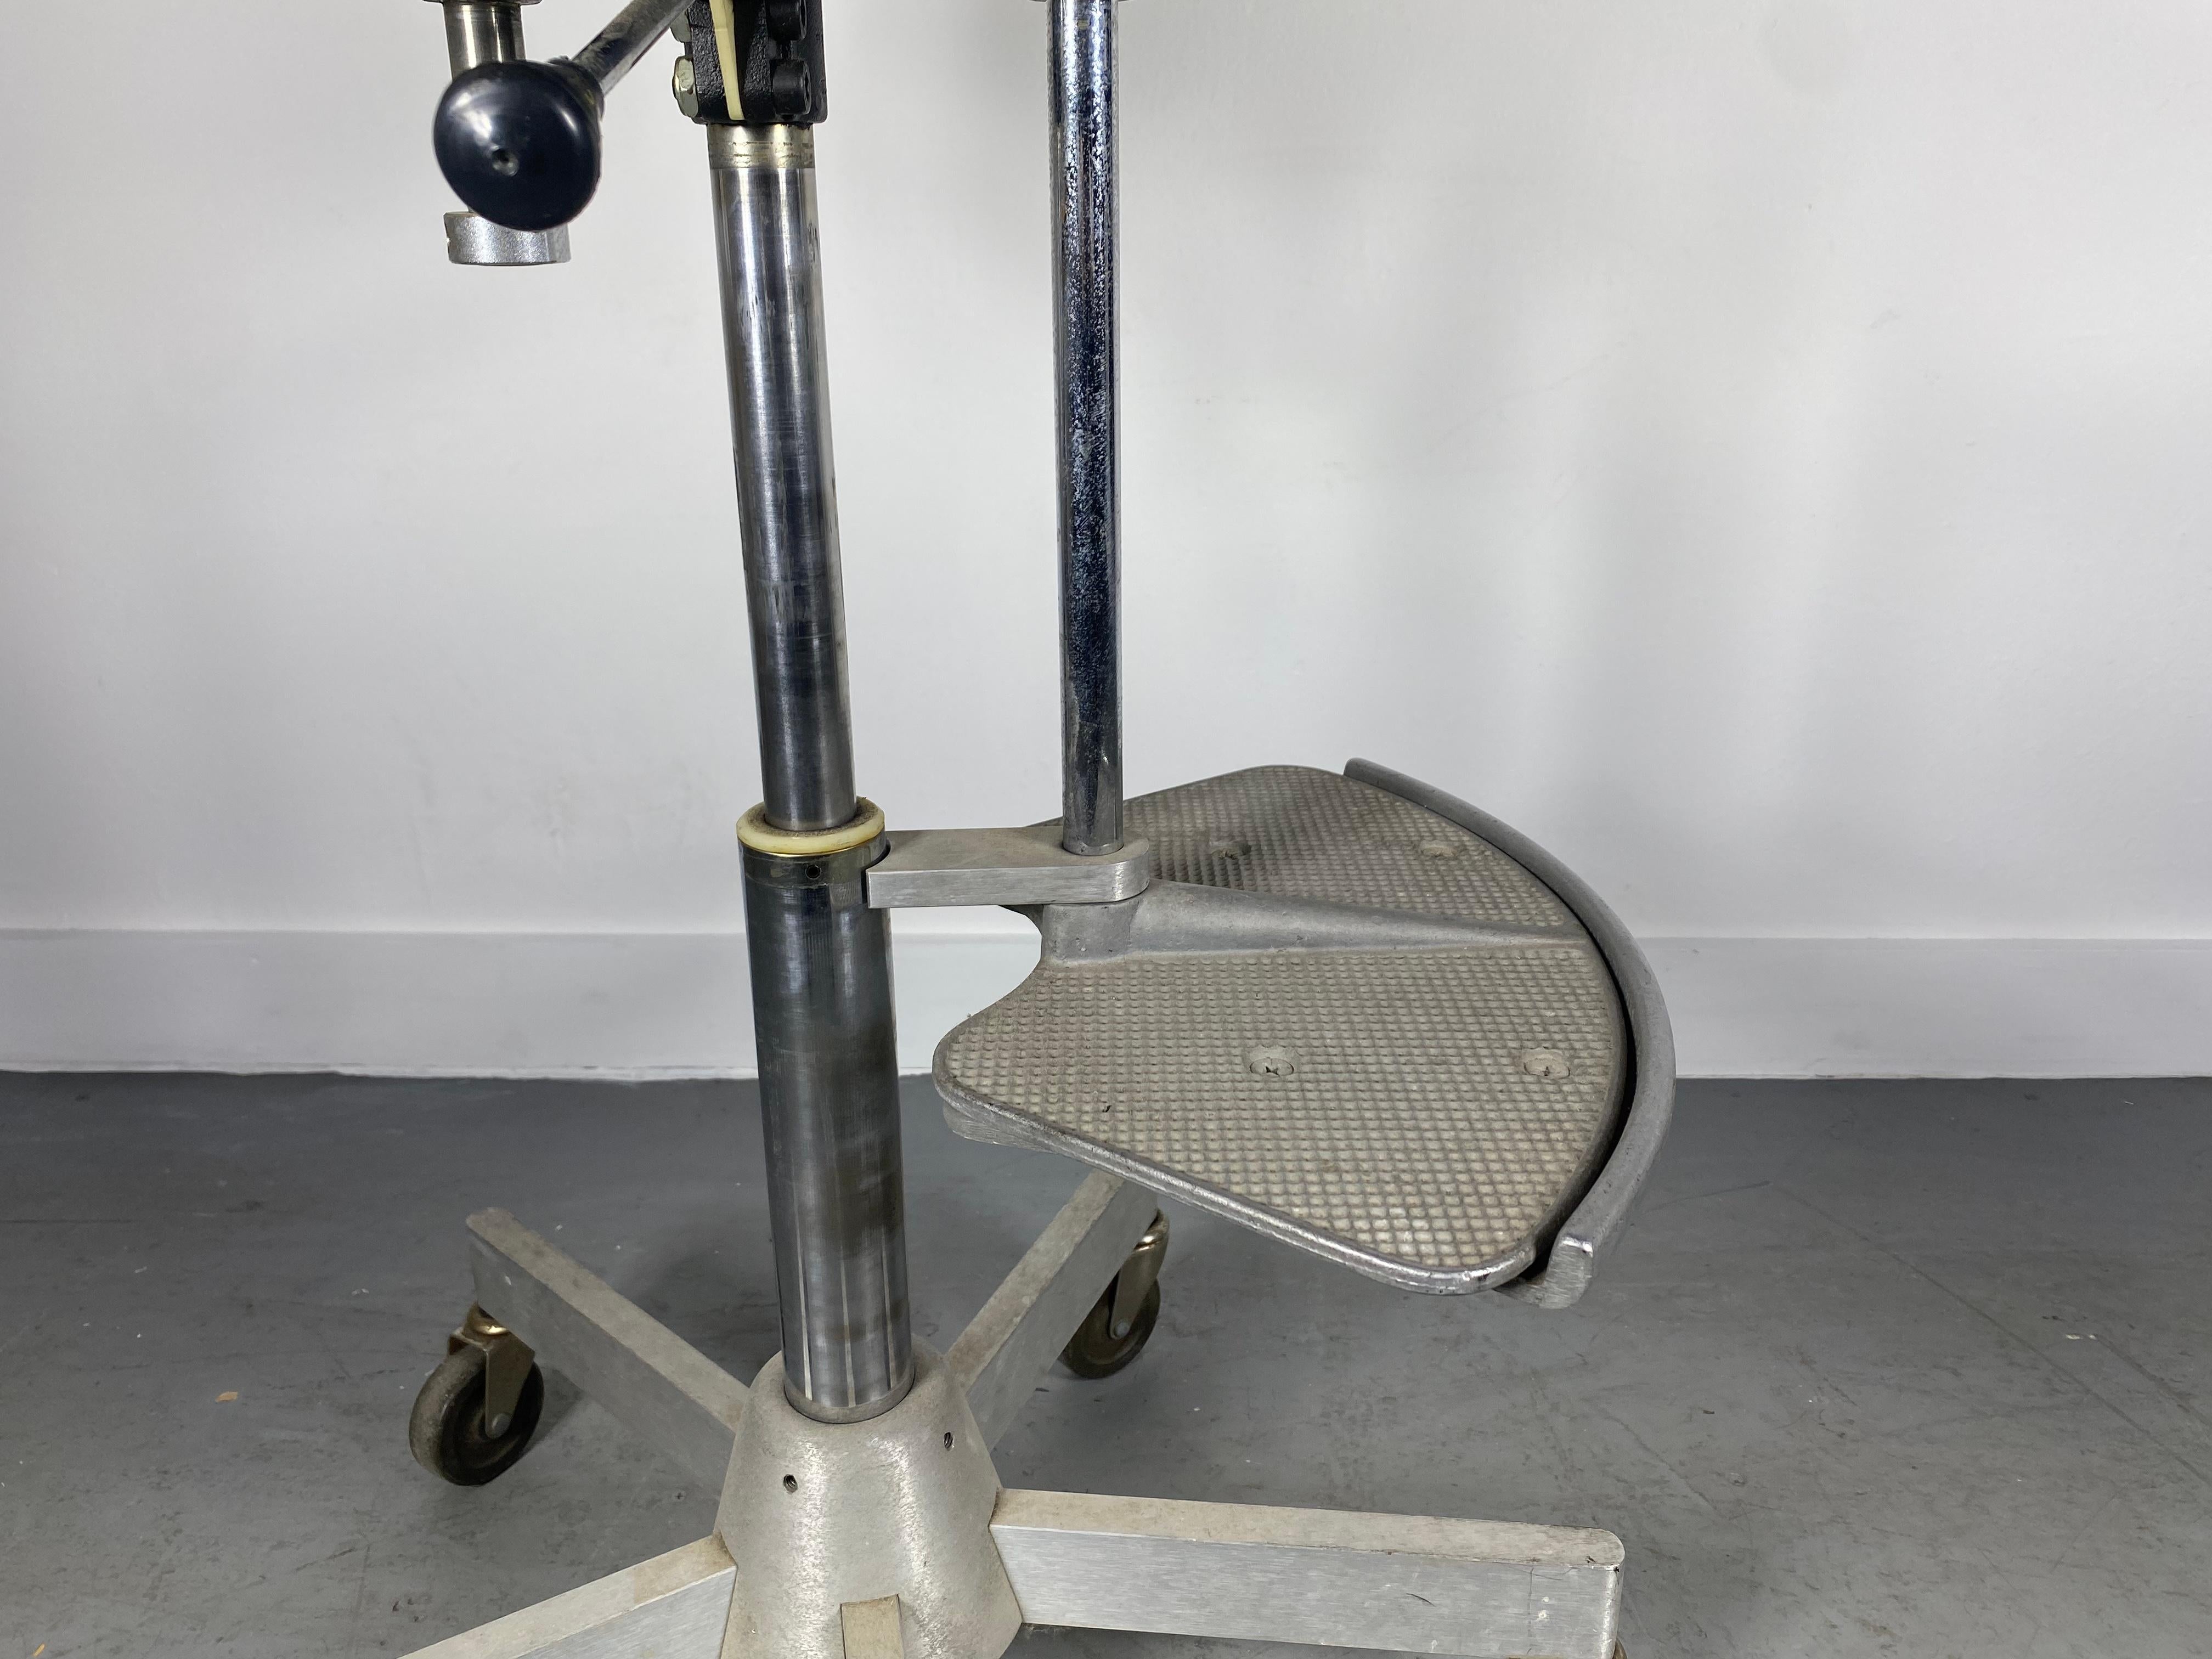 Unusual Modern Industrial Adjustable Height Dental / Task Stool by Den-tal-ez In Good Condition For Sale In Buffalo, NY